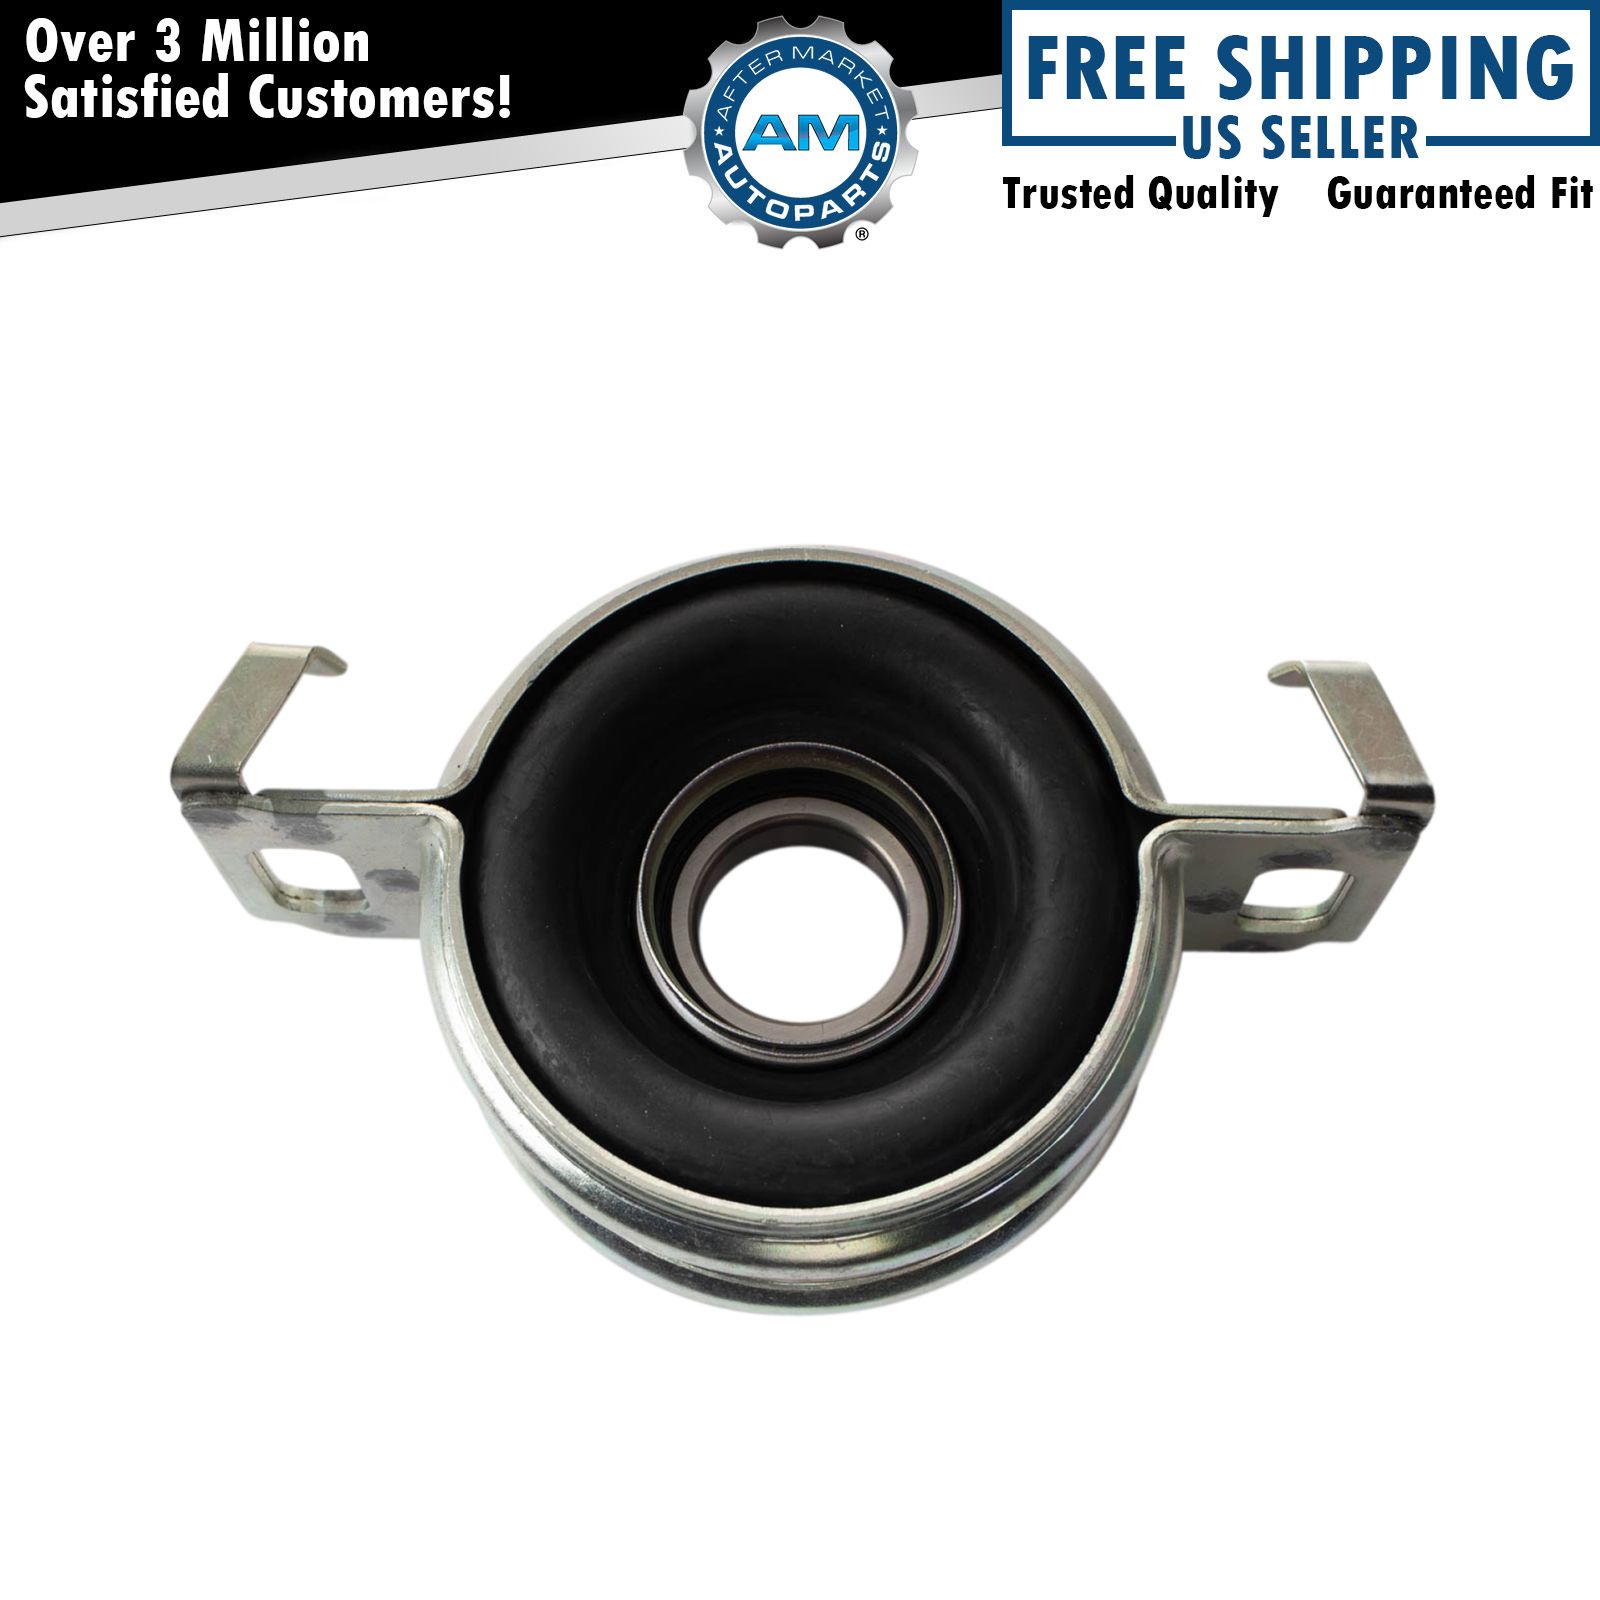 Driveshaft Center Support Bearing For 1993-2015 Toyota T100 Tacoma Tundra